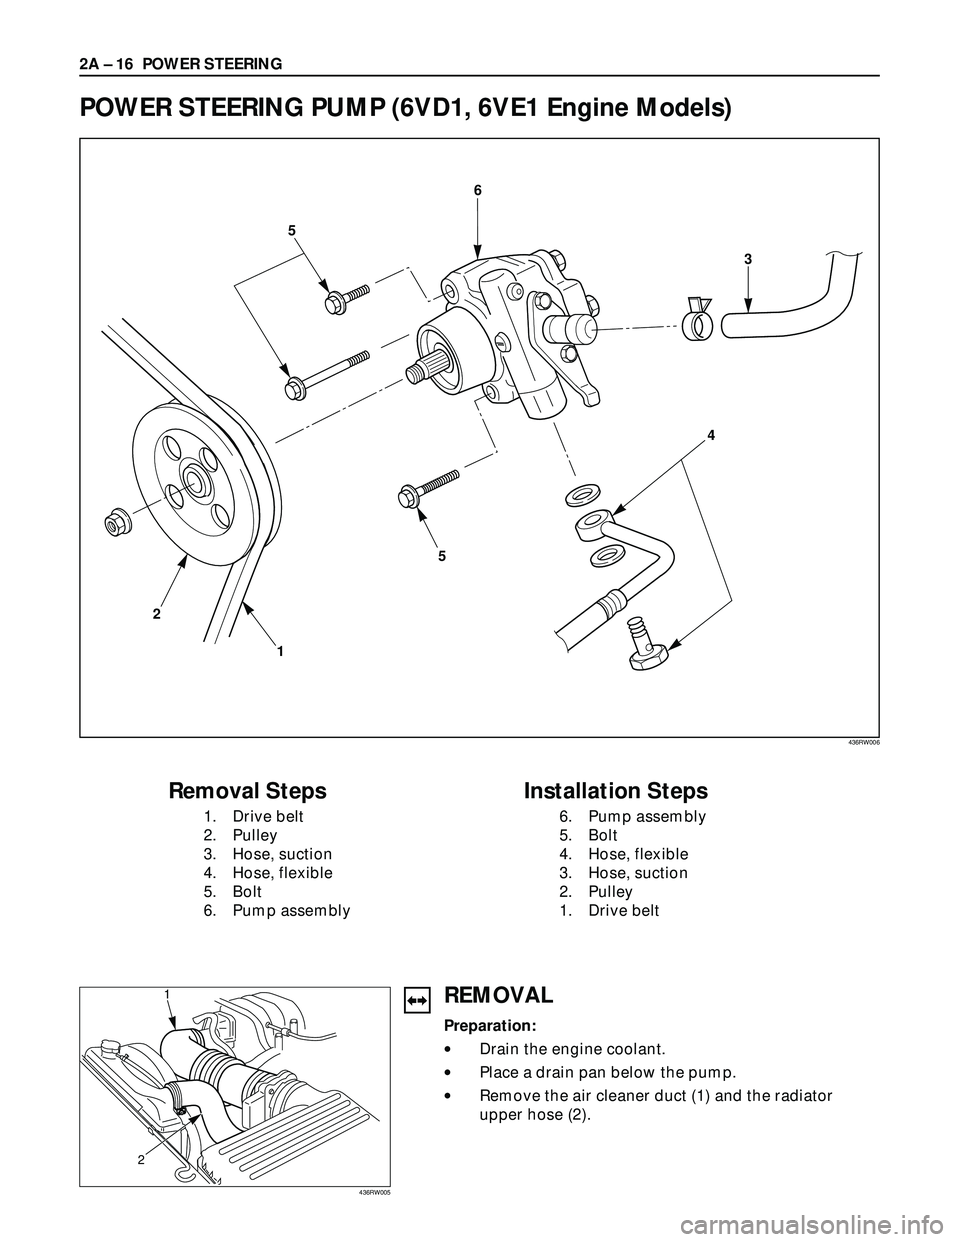 ISUZU TROOPER 1998  Service Repair Manual 2A – 16 POWER STEERING
POWER STEERING PUMP (6VD1, 6VE1 Engine Models)
6
5
3
4
5
1 2
Removal Steps
1. Drive belt
2. Pulley
3. Hose, suction
4. Hose, flexible
5. Bolt
6. Pump assembly 
Installation St